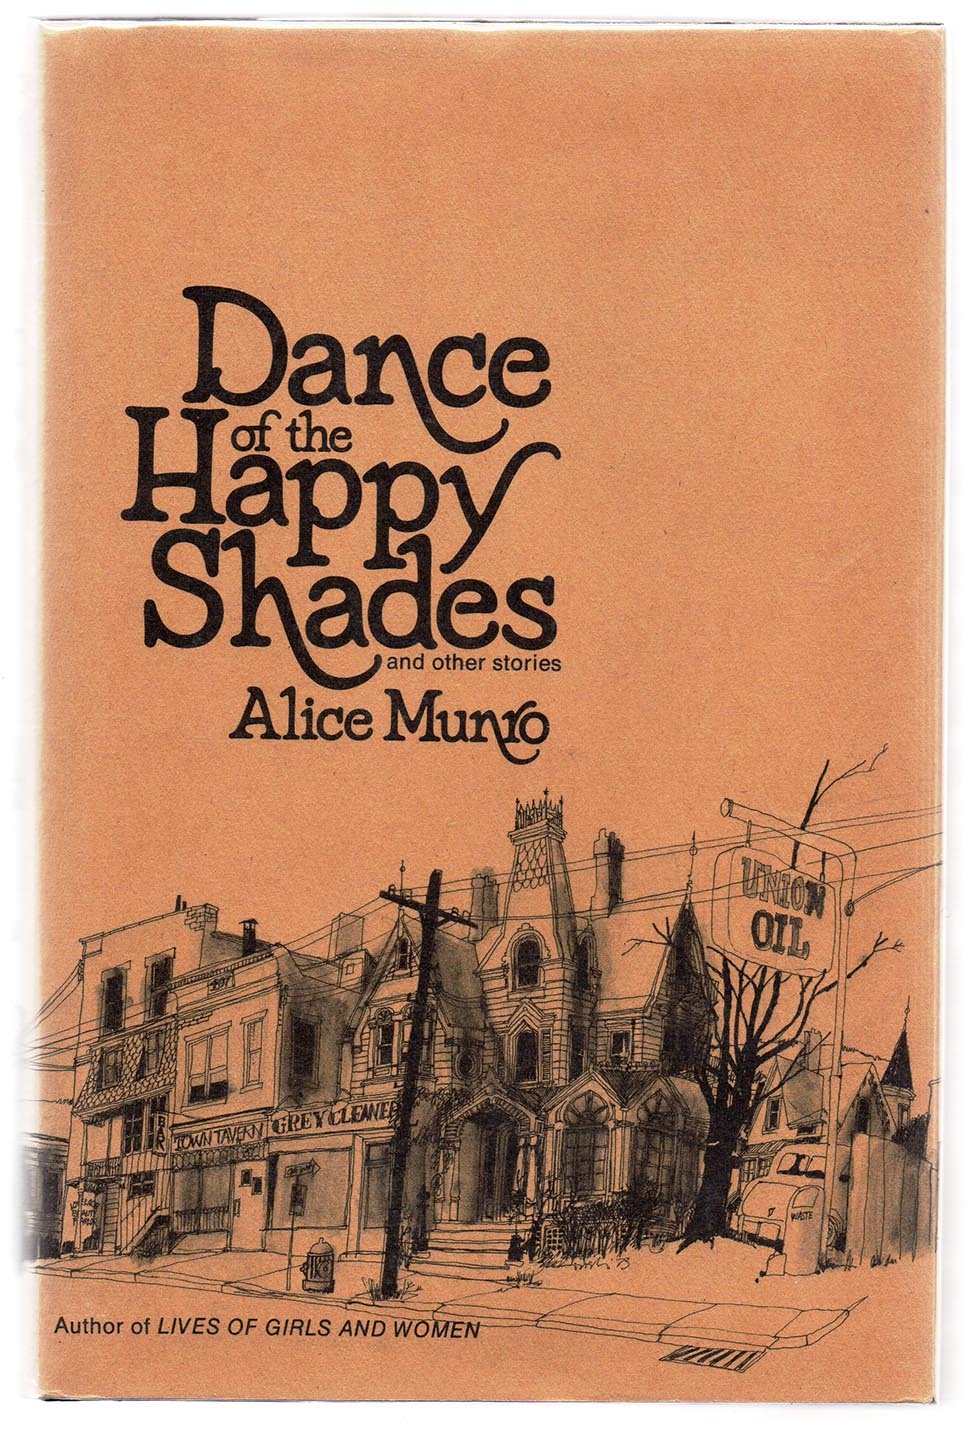 Dance of the Happy Shades and other stories